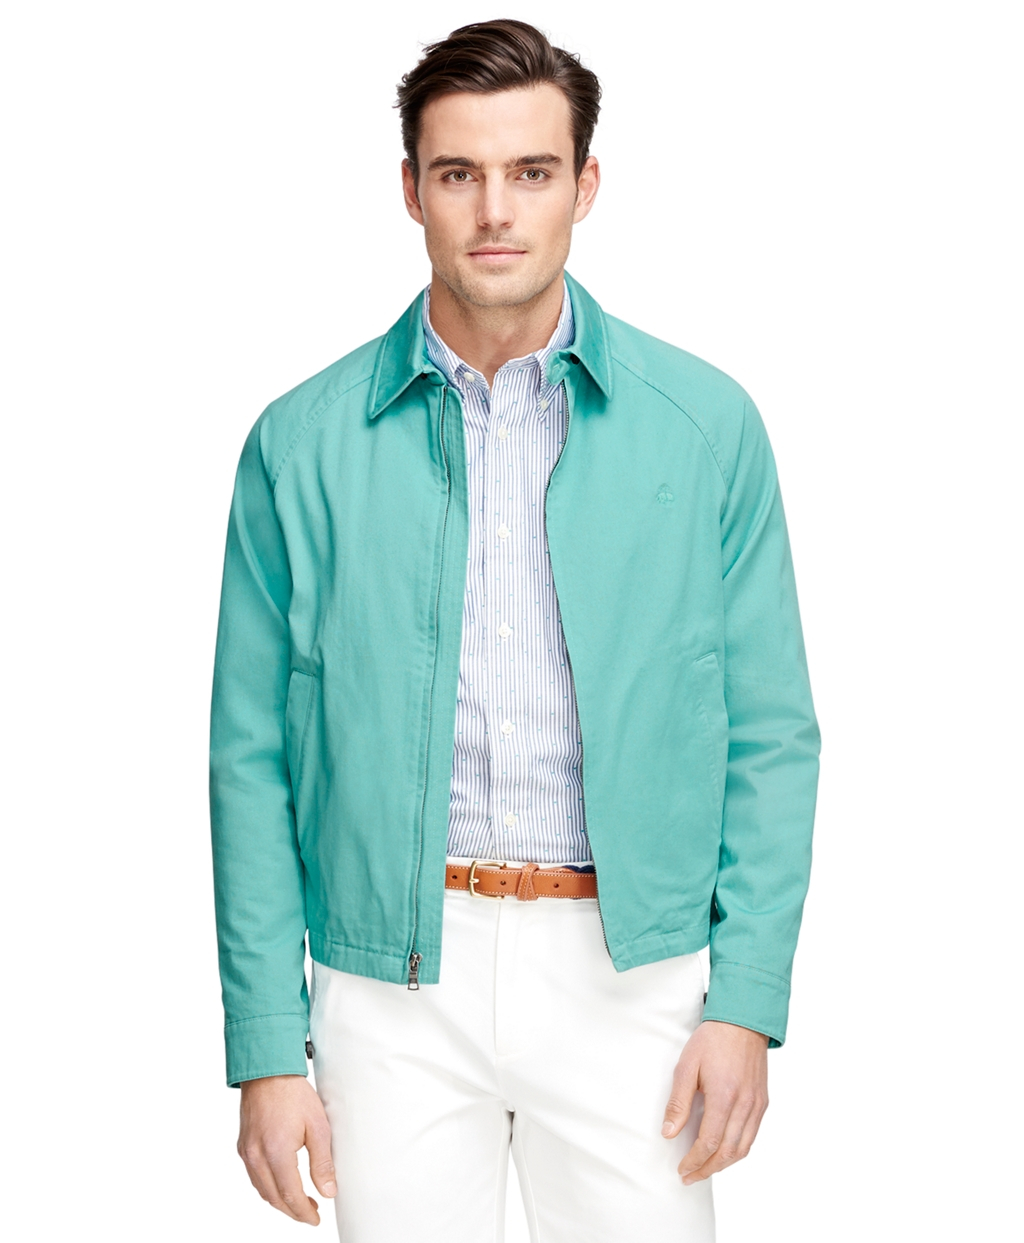 Lyst - Brooks Brothers Clifton Bomber Jacket in Green for Men